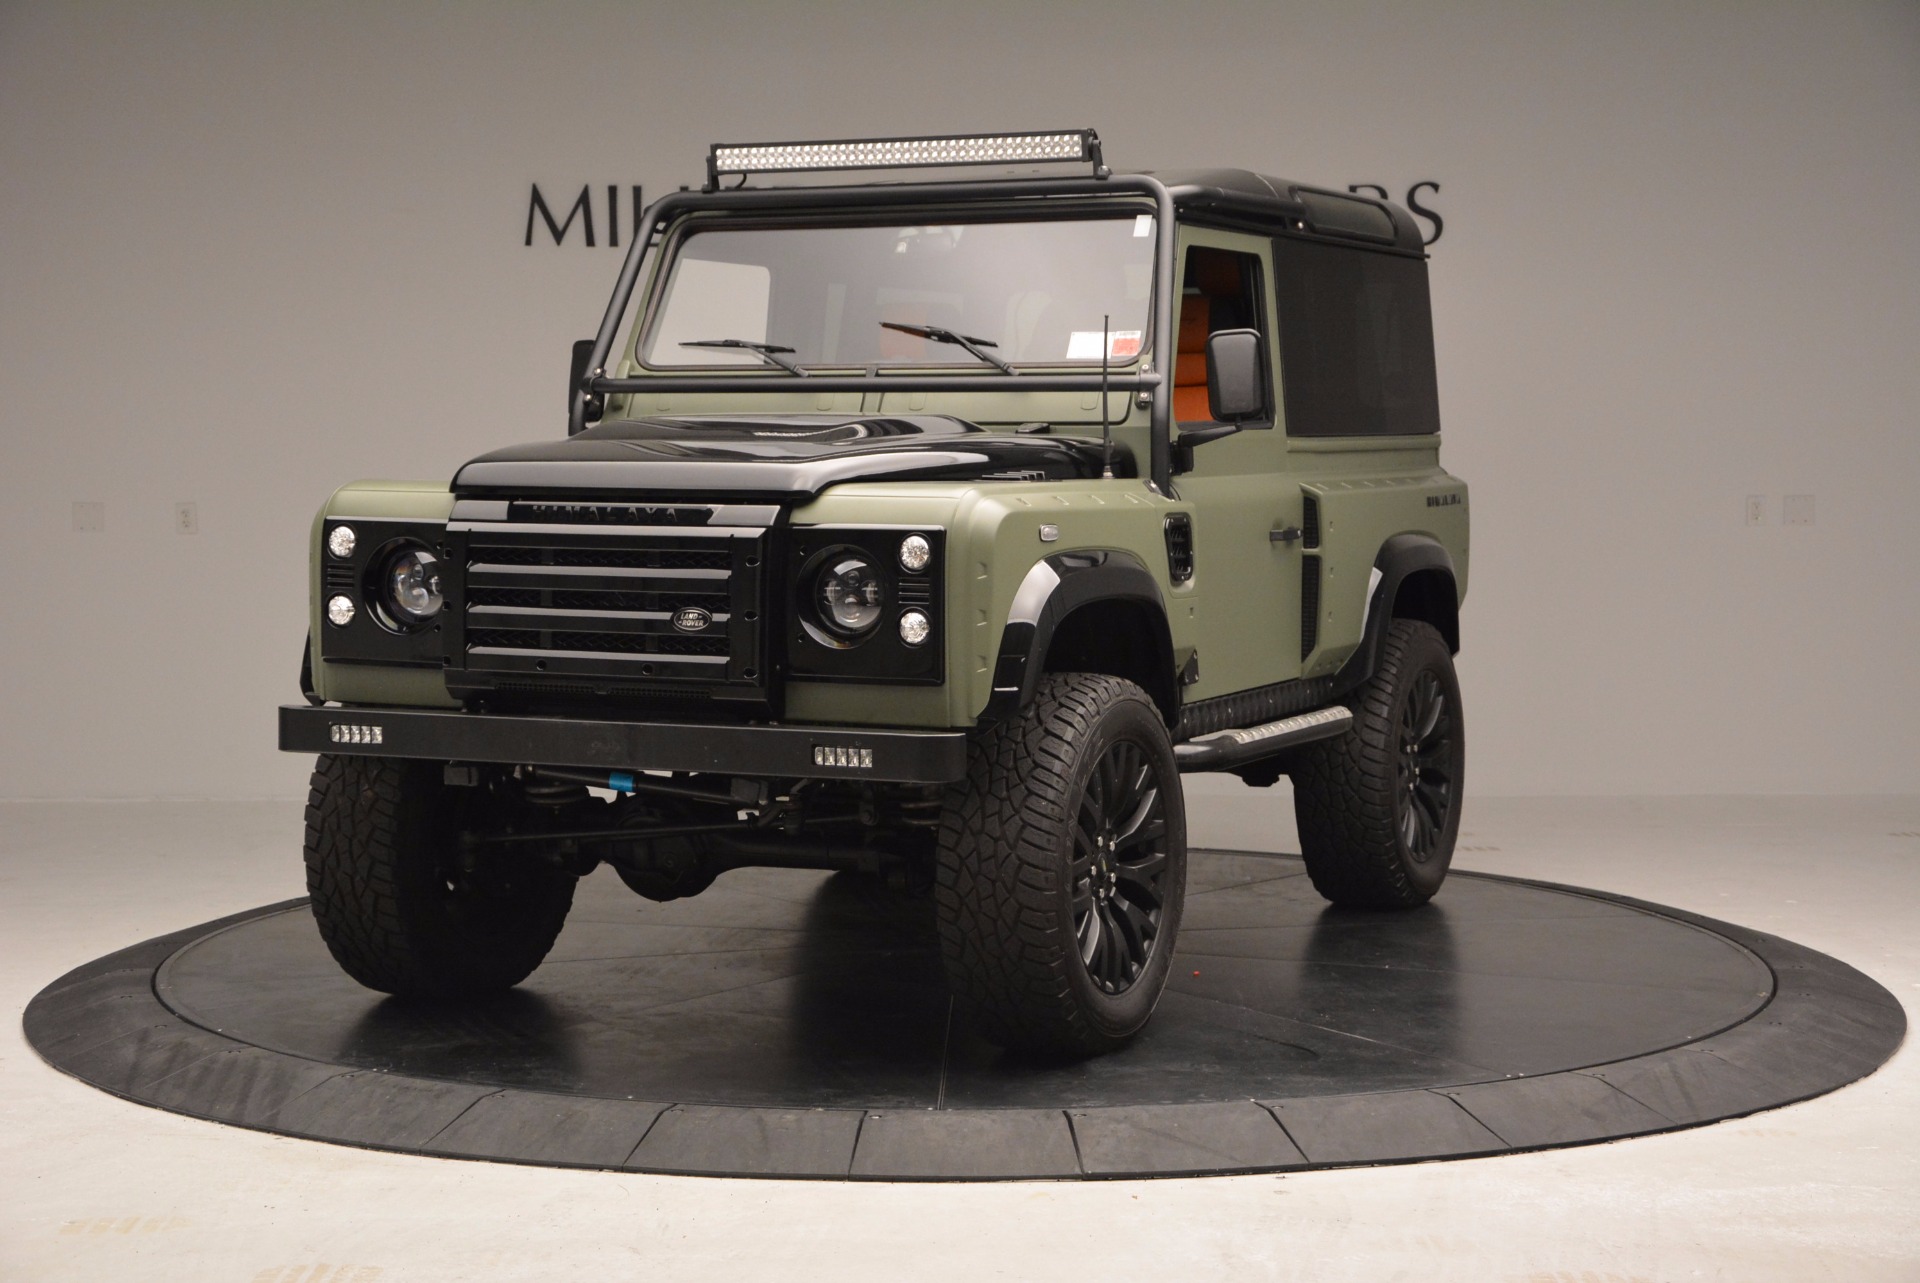 Used 1997 Land Rover Defender 90 for sale Sold at Aston Martin of Greenwich in Greenwich CT 06830 1